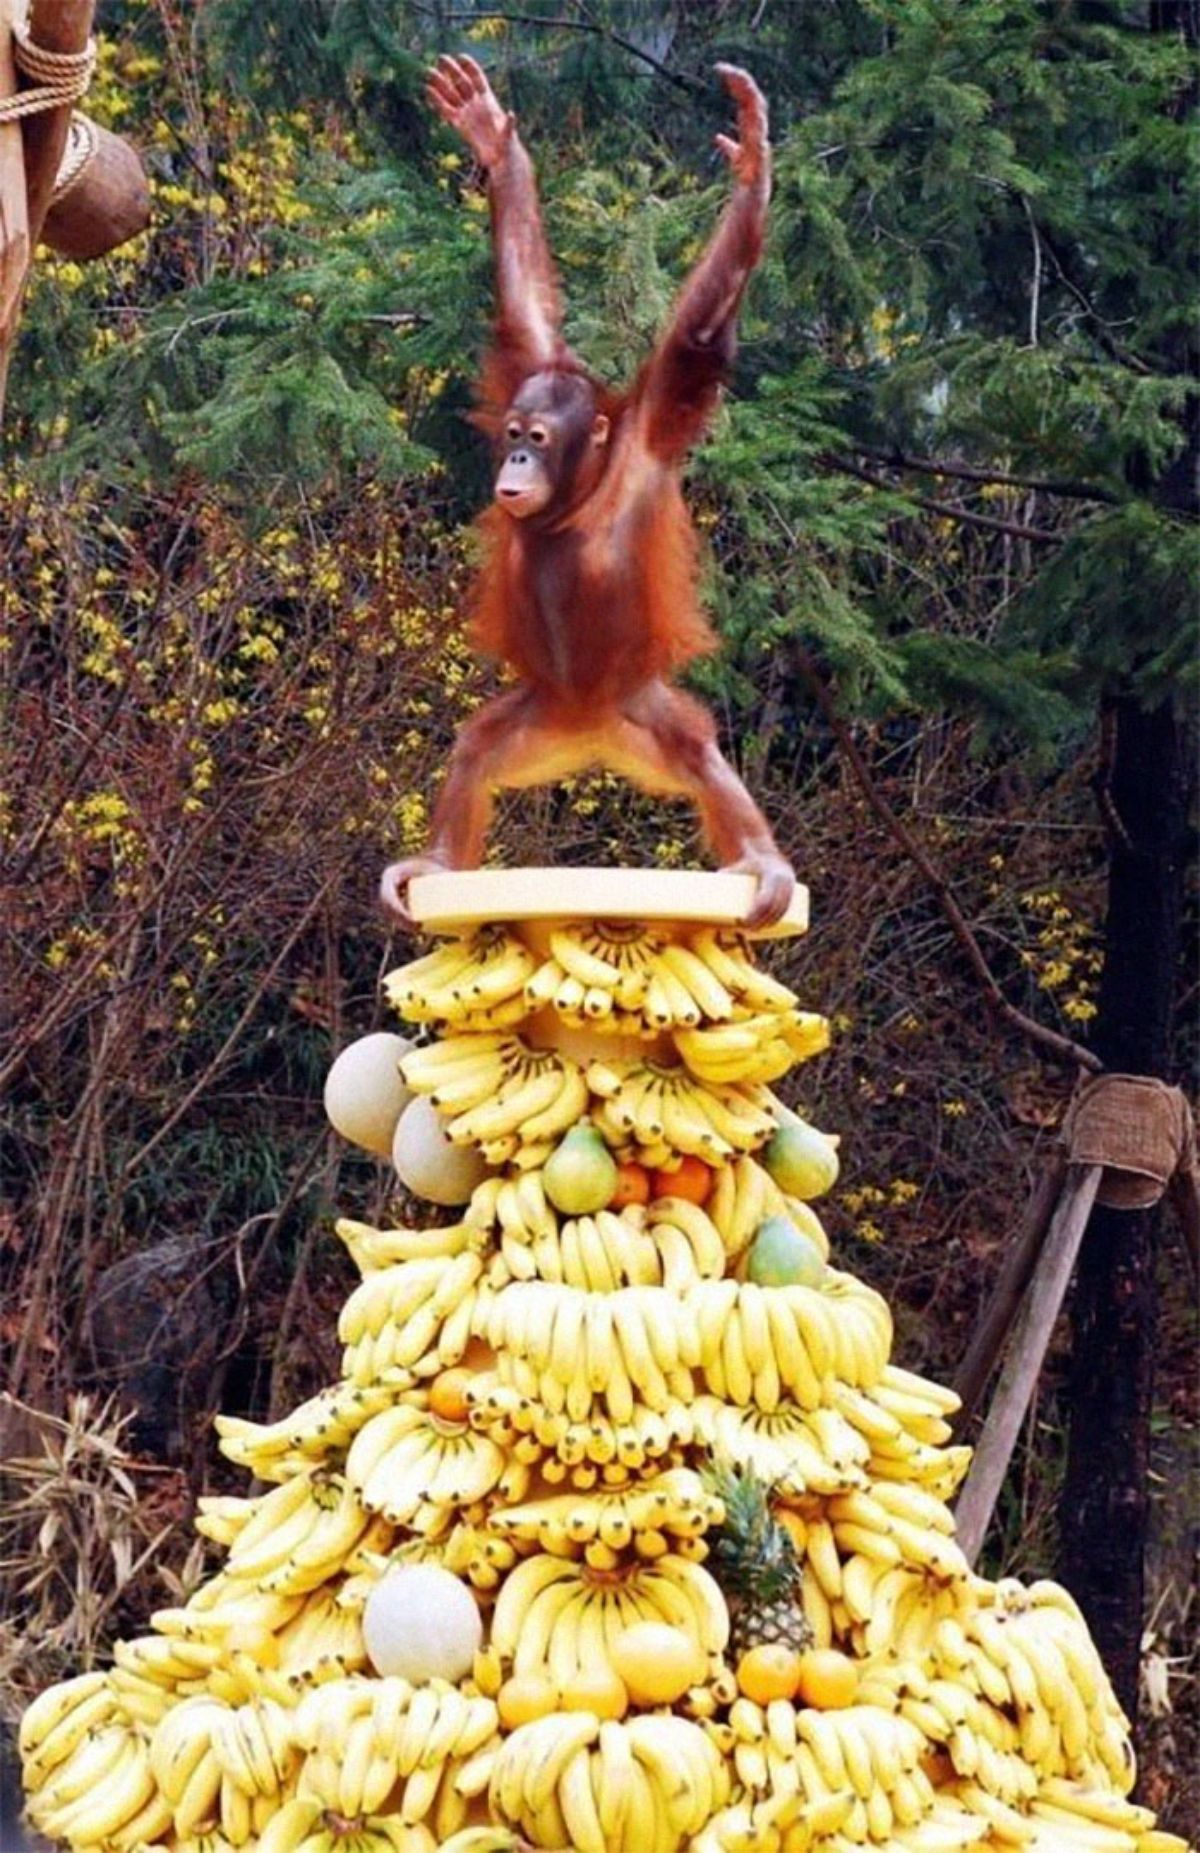 baby orangutan standing on a platform placed over a tall pile of mainly bananas and other fruits with the orangutan raising its hands in the air